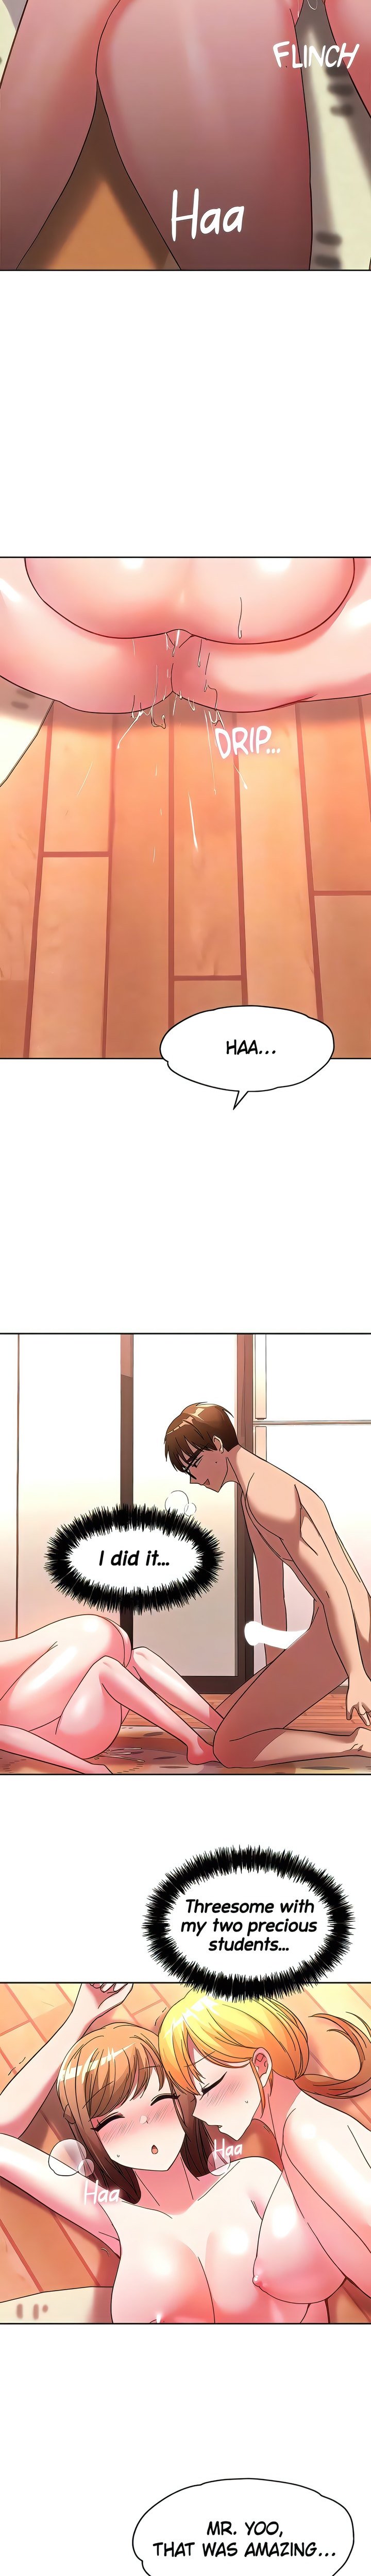 girls-i-used-to-teach-chap-33-17